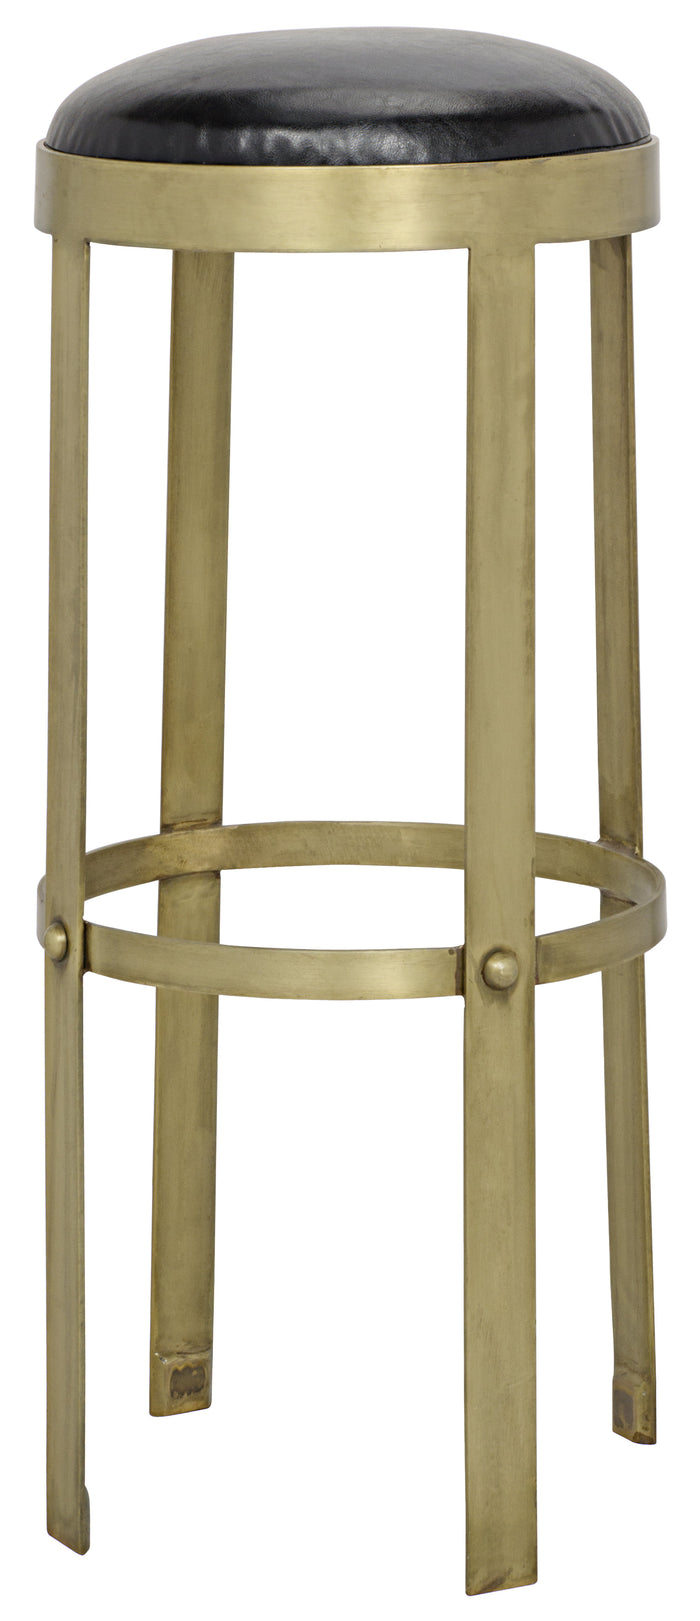 Noir Prince Stool with Leather, Brass Finish